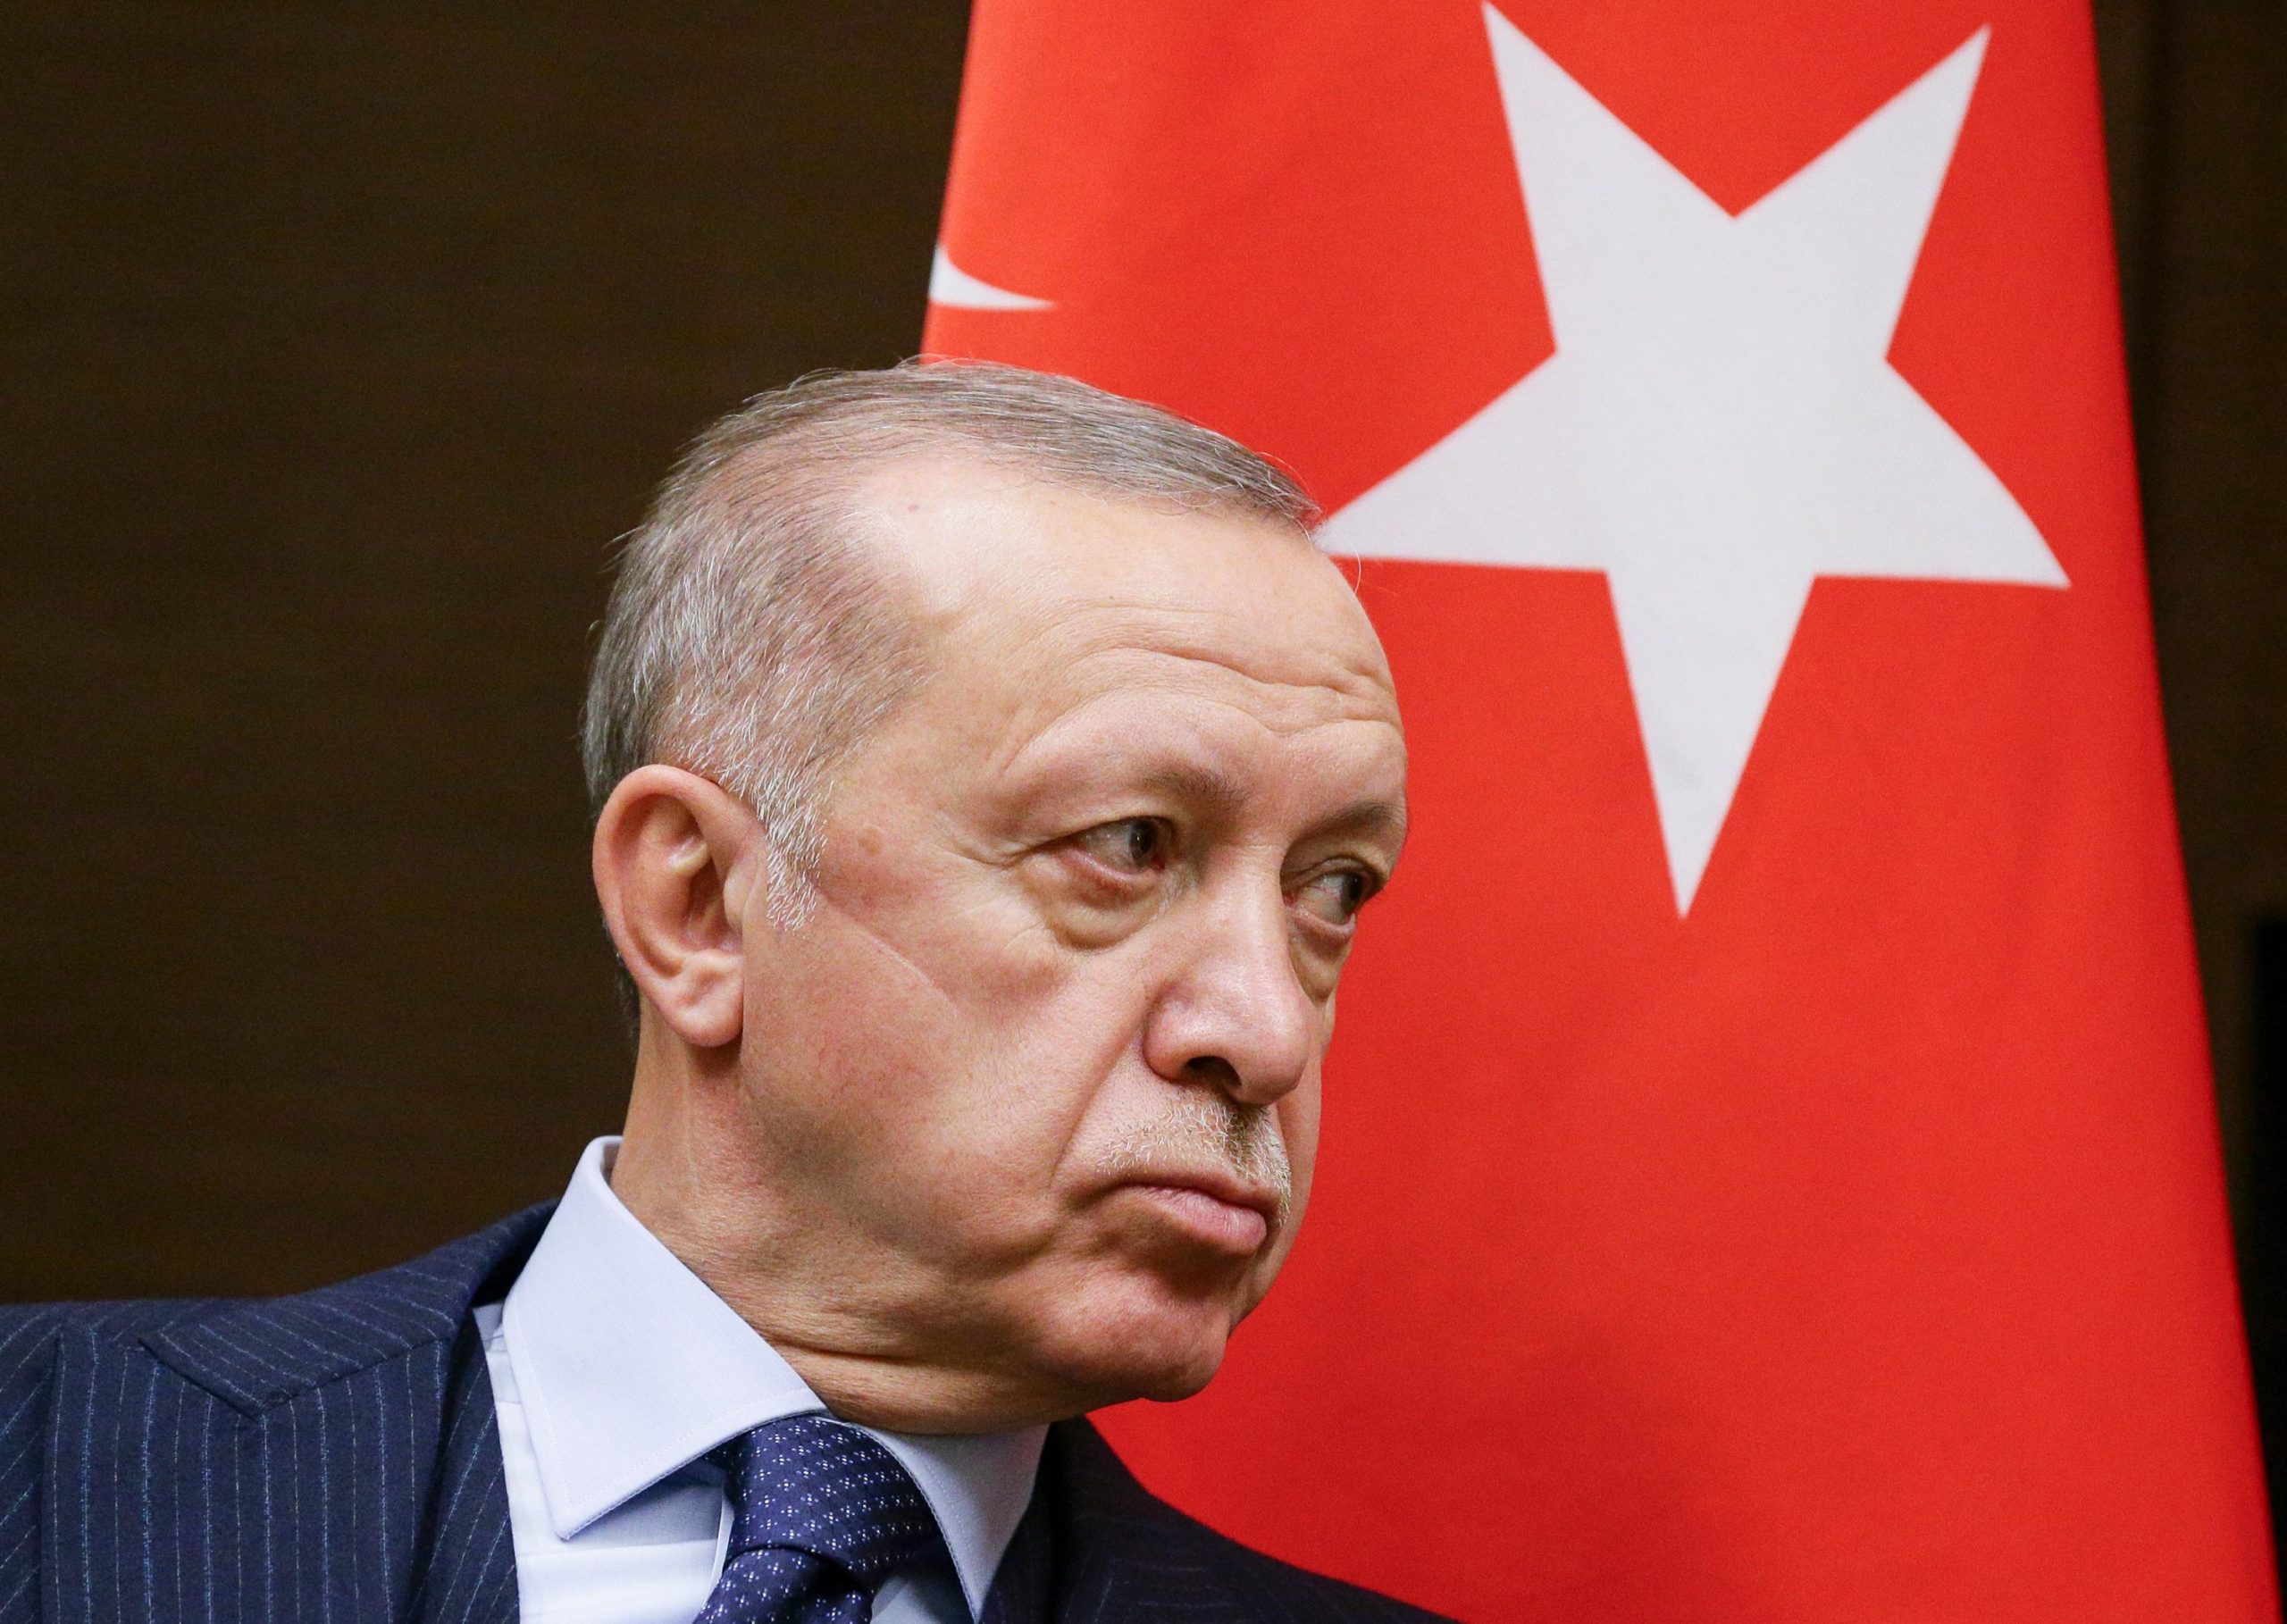 Turkey wants compensation for ouster from US-led jet program 2